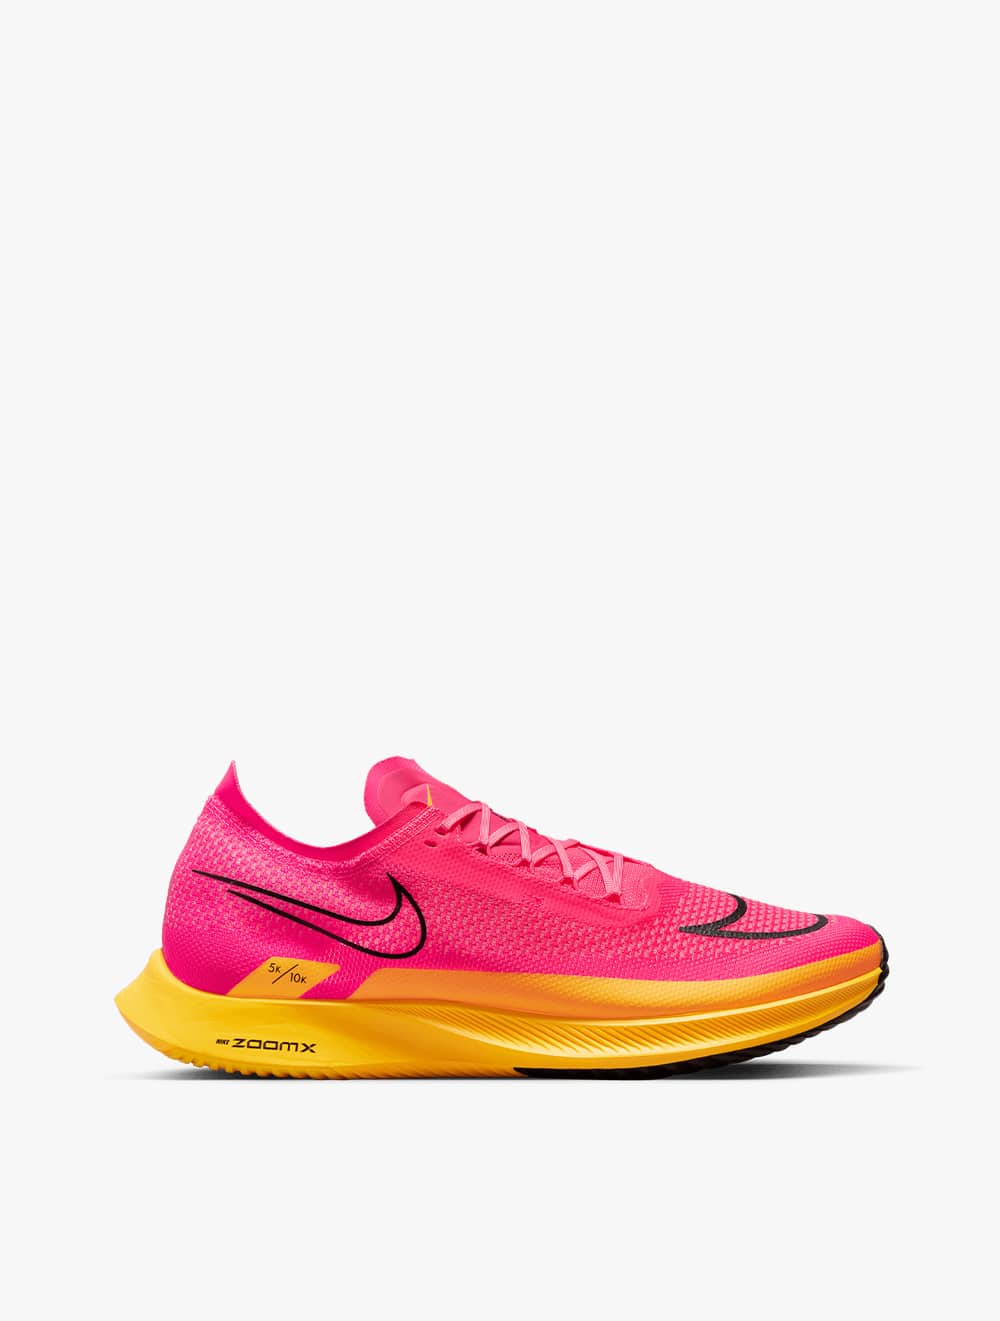 Nike Streakfly Road Racing Shoes - Red